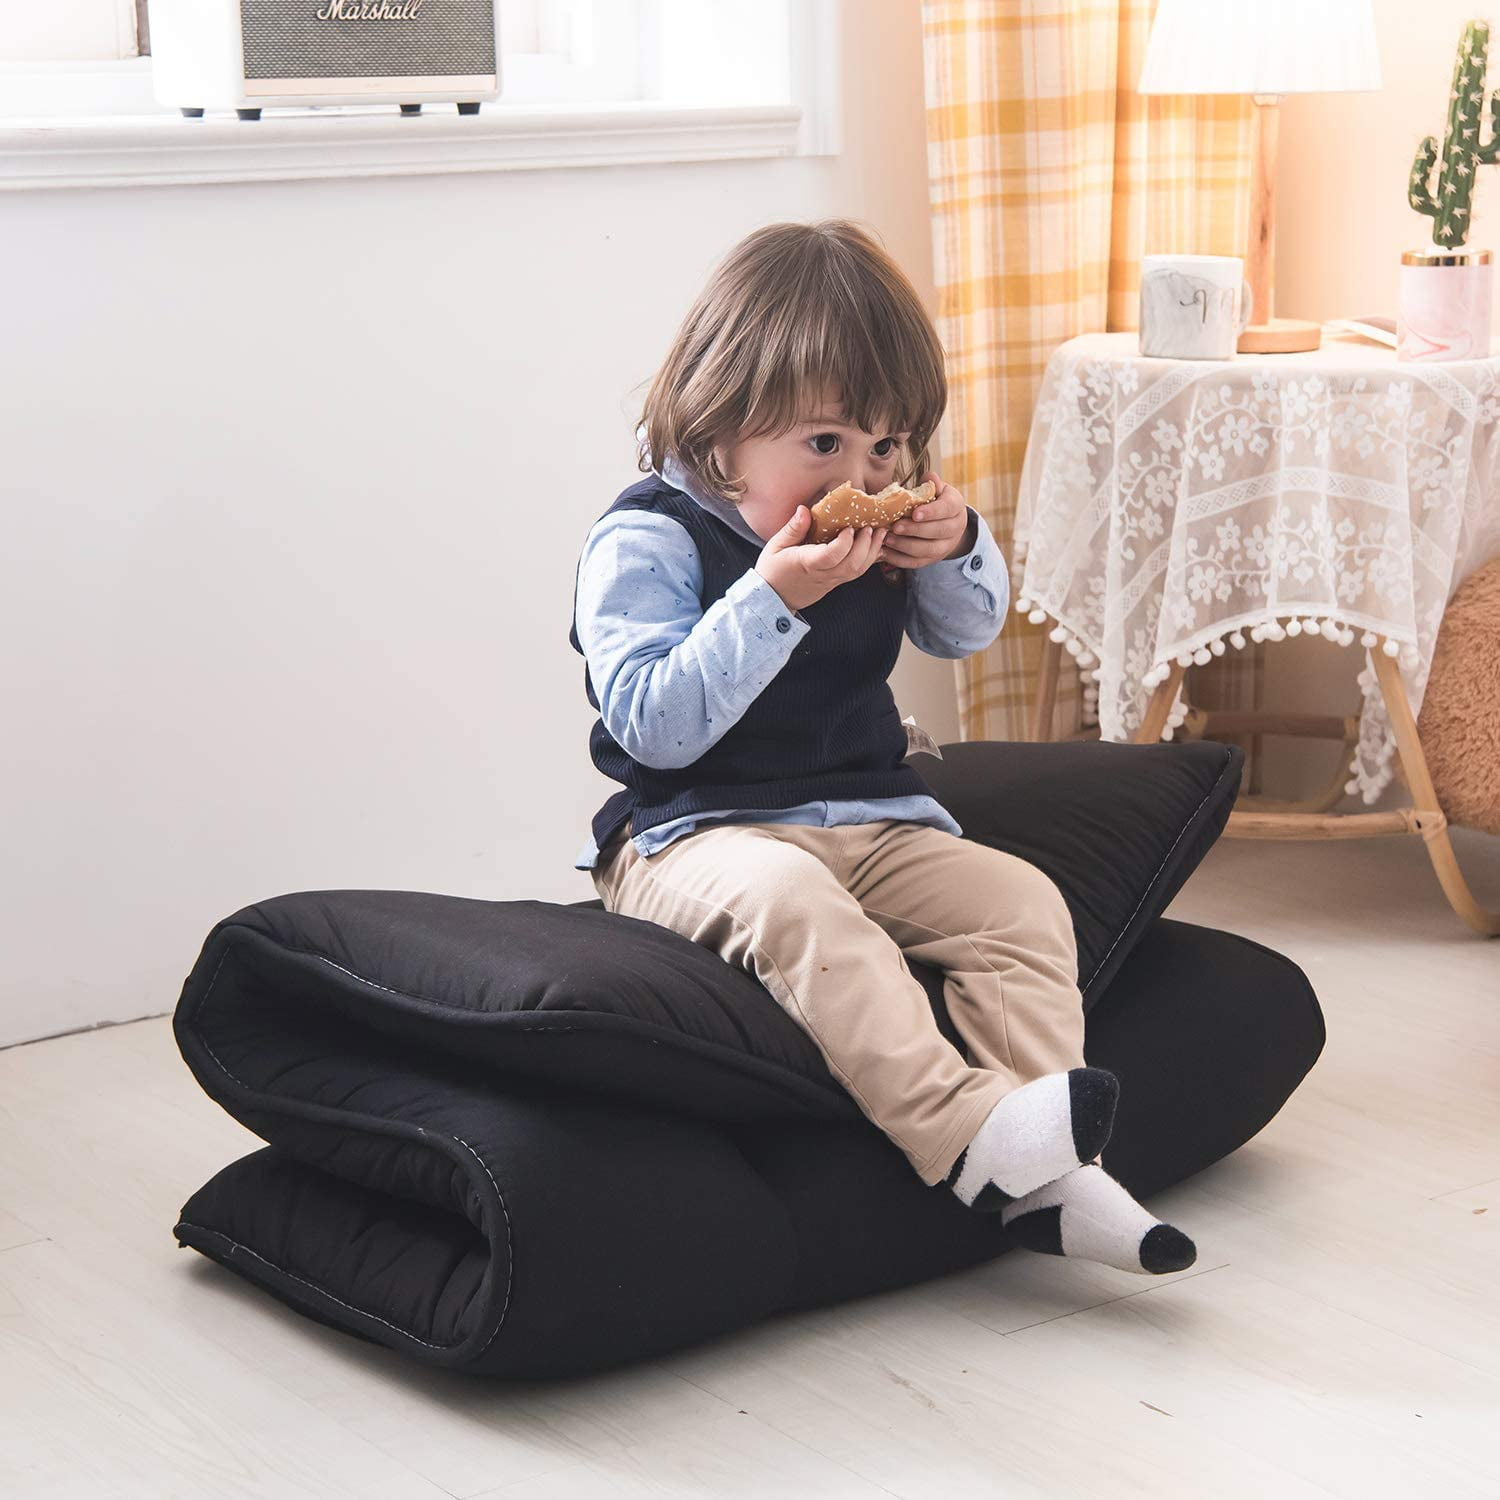 Mattress for Toddler YOSHOOT Portable Toddler Travel Bed Kids Memory Foam Floor Mattress Bed Foldable Portable Travel Mattress Camp Mattress Tatami Mat with Mattress Cover and Carry Storage Bag 